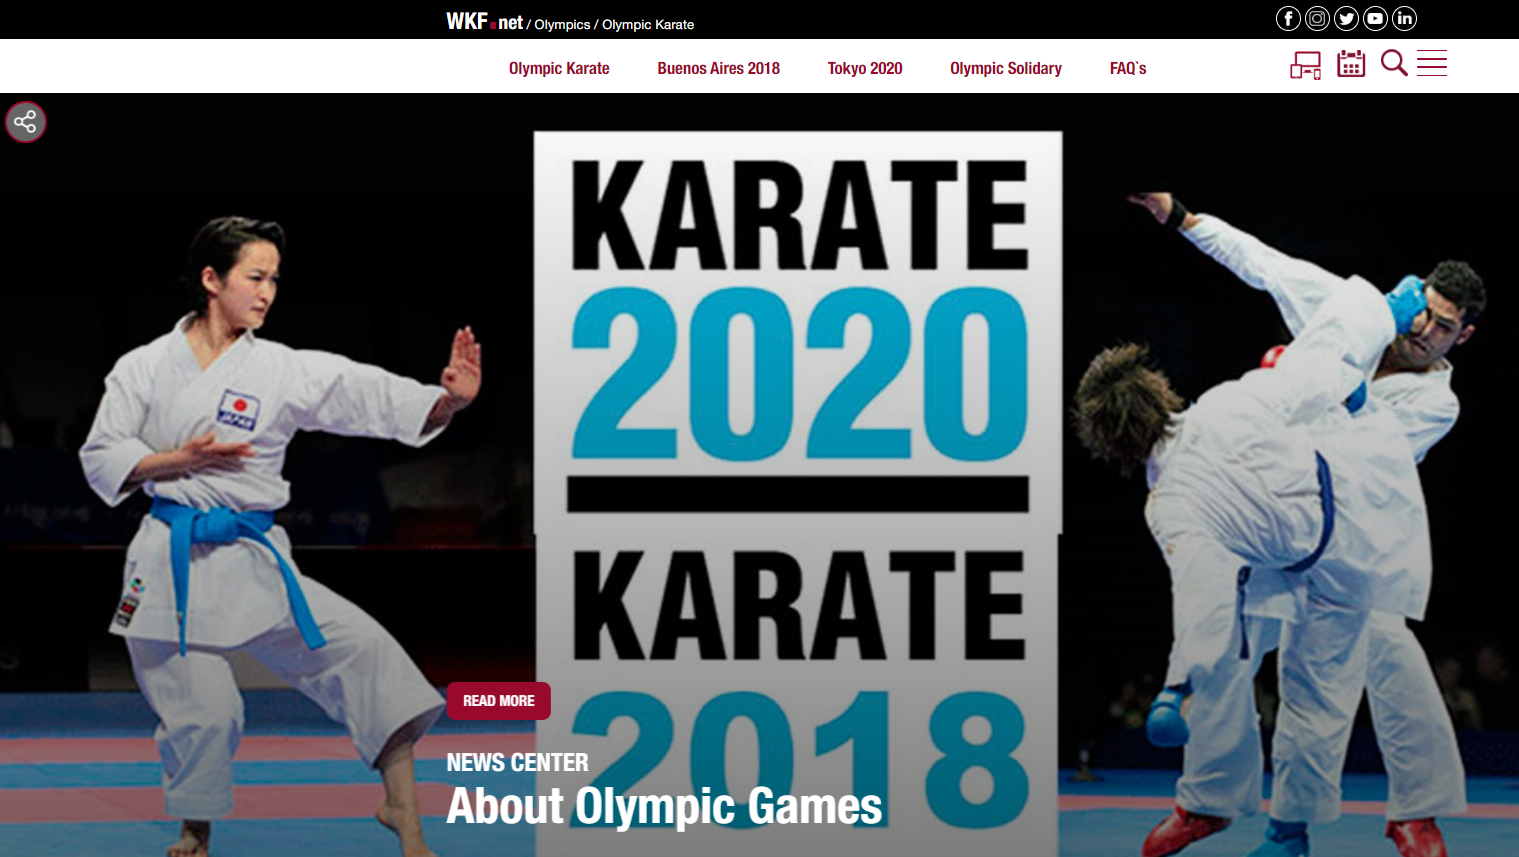 The World Karate Federation has re-launched its website ©WKF